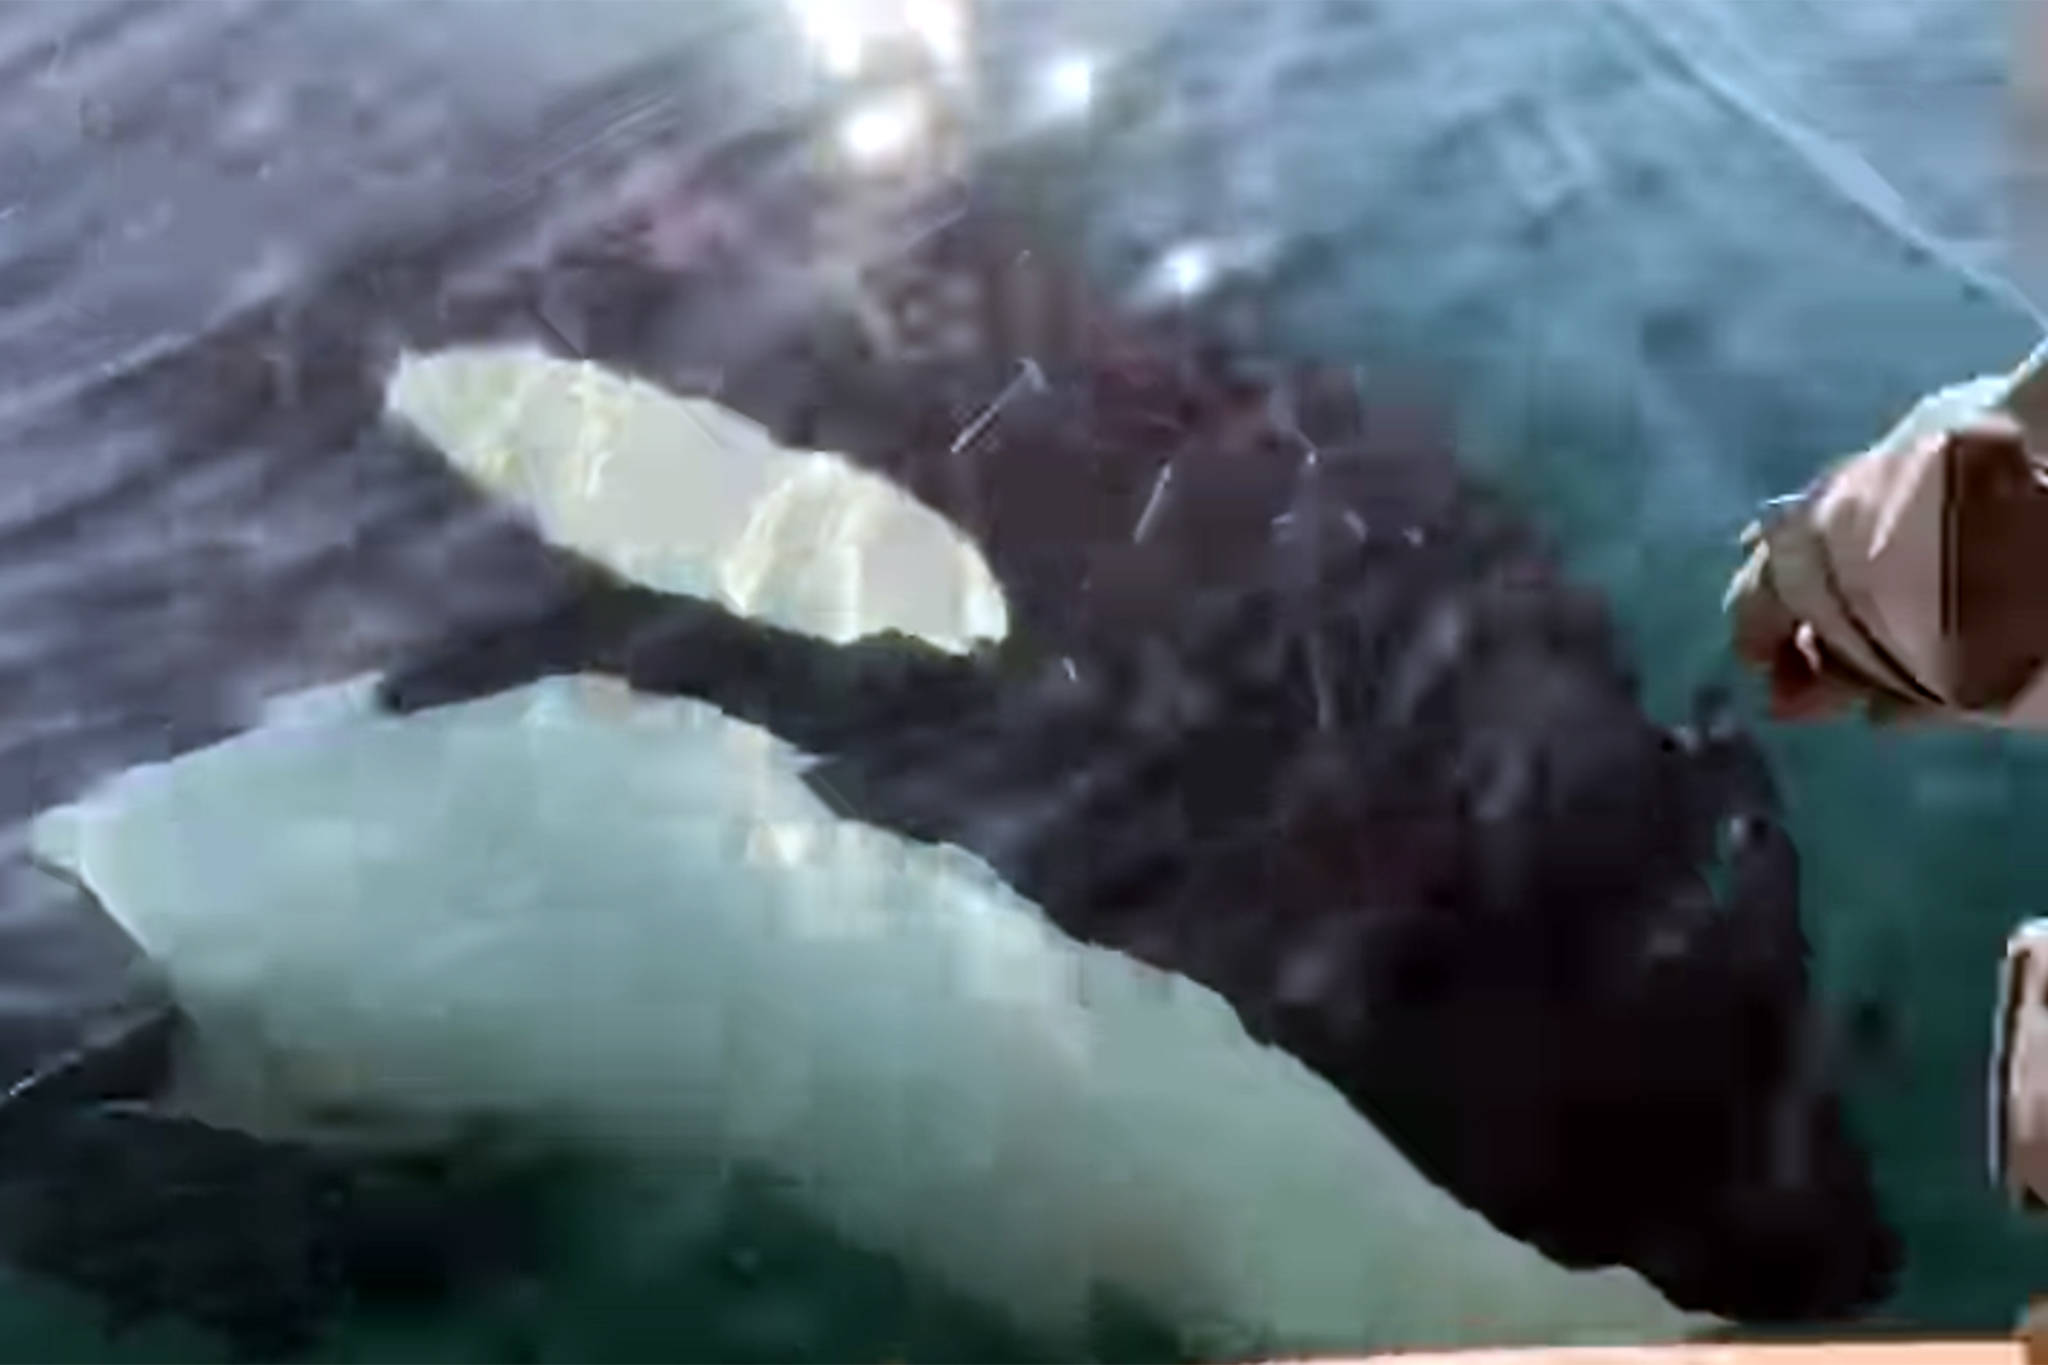 This screenshot from a video posted by Salty Lady Seafood Co. shows an orca swimming close to a boat. "I thought for sure it would splash us with its tail or nose the skiff," the company said in a social media post. "It was just checking us out though. Fun end to a hard day of work at the farm." (Screenshot)